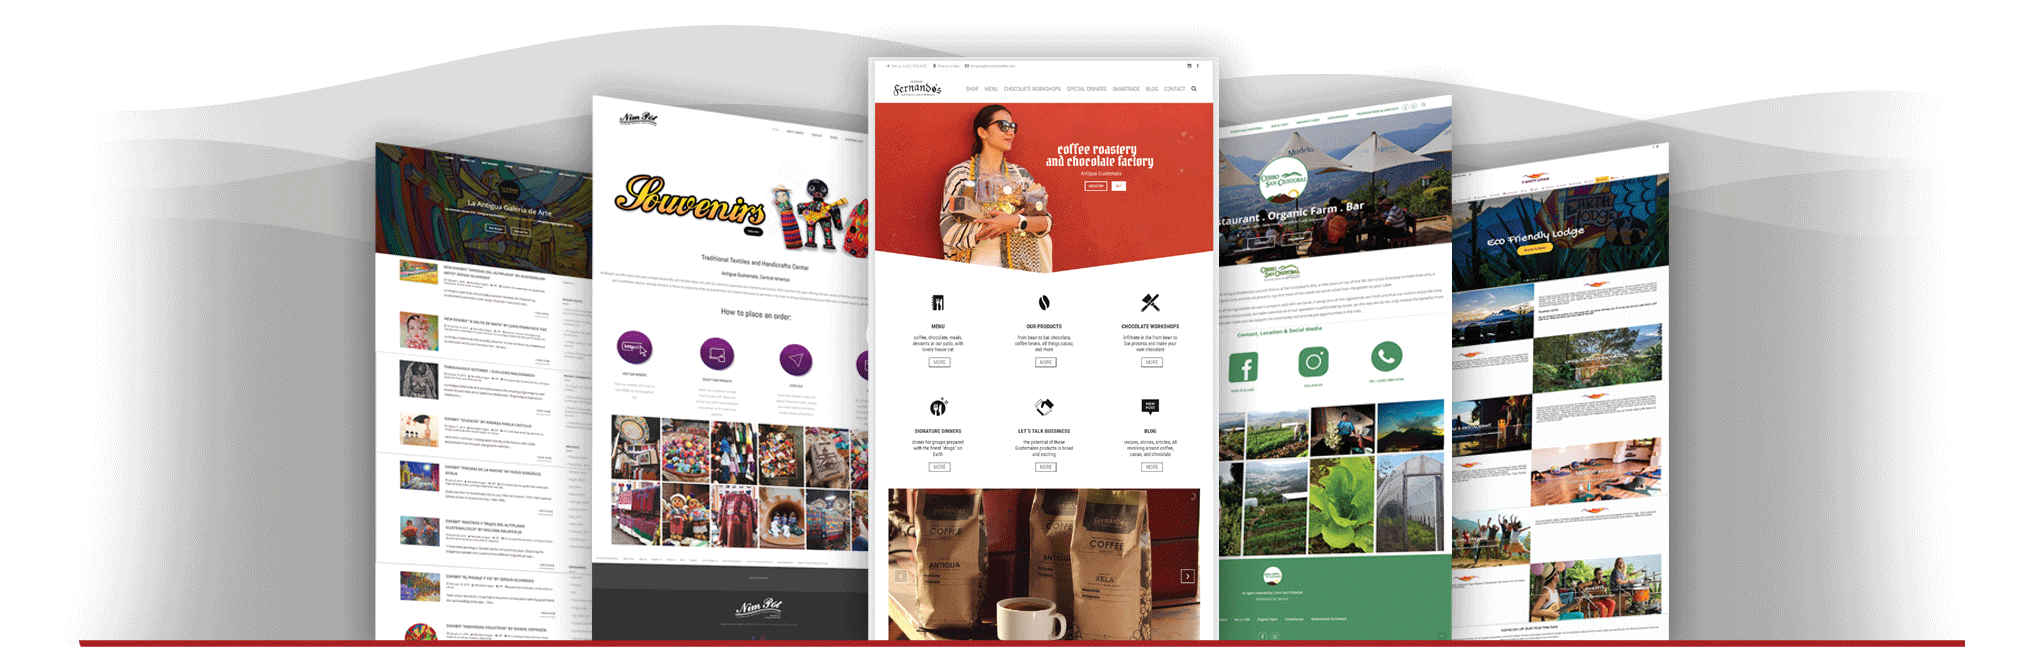 websites-developed-by-where-in-guate